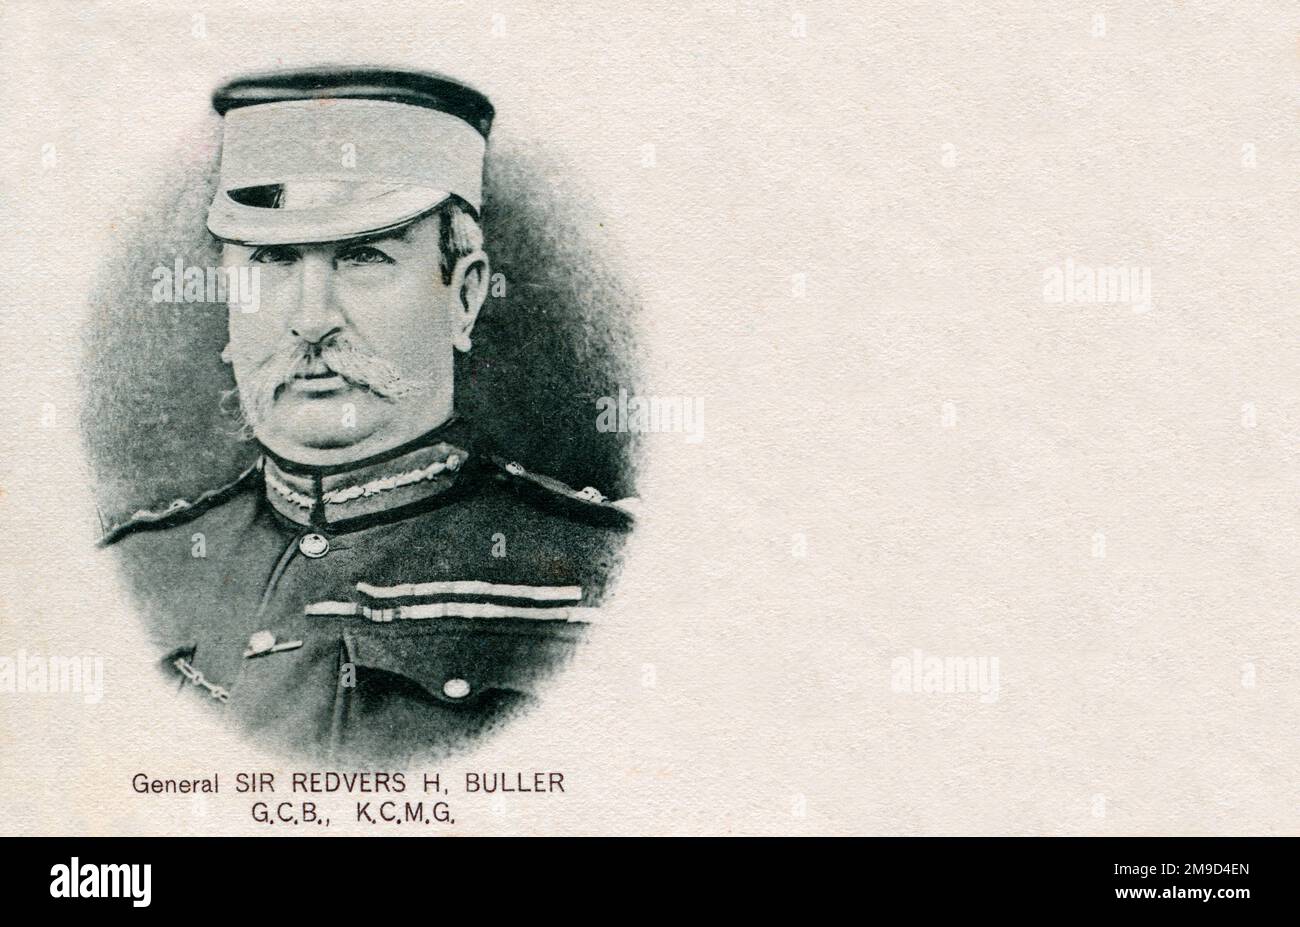 Redvers Buller served in South Africa during the Kaffir and Zula Wars during which time he won the VC. He served in the First and Second Boer Wars. During the latter he was Commander of the Natal forces but was replaced after a series of setbacks. Stock Photo